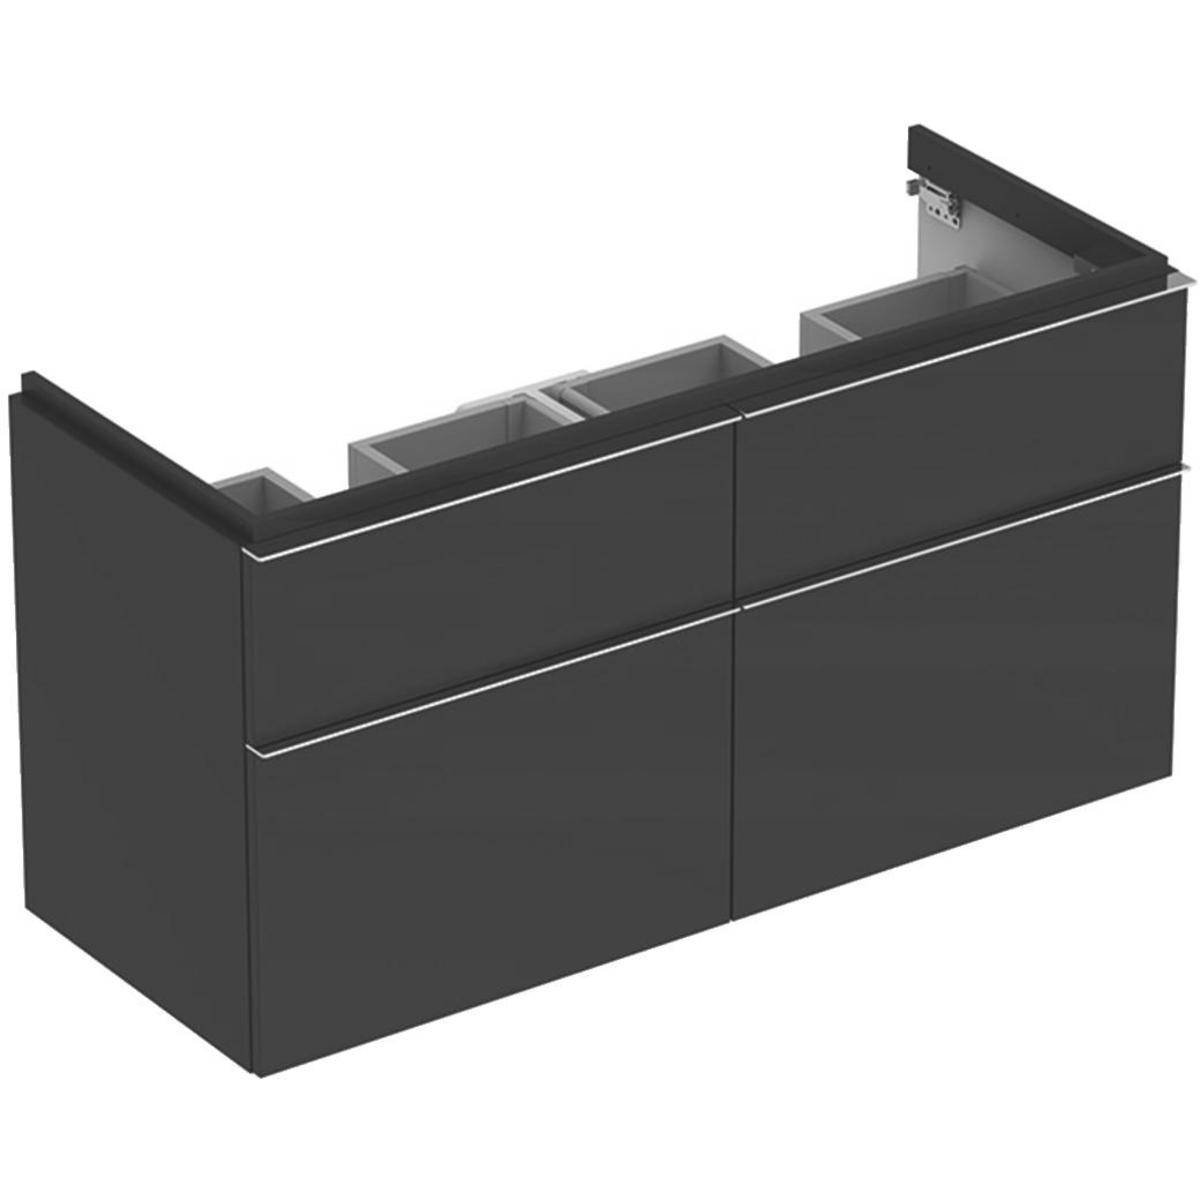 iCon cabinet for double washbasin, with four drawers